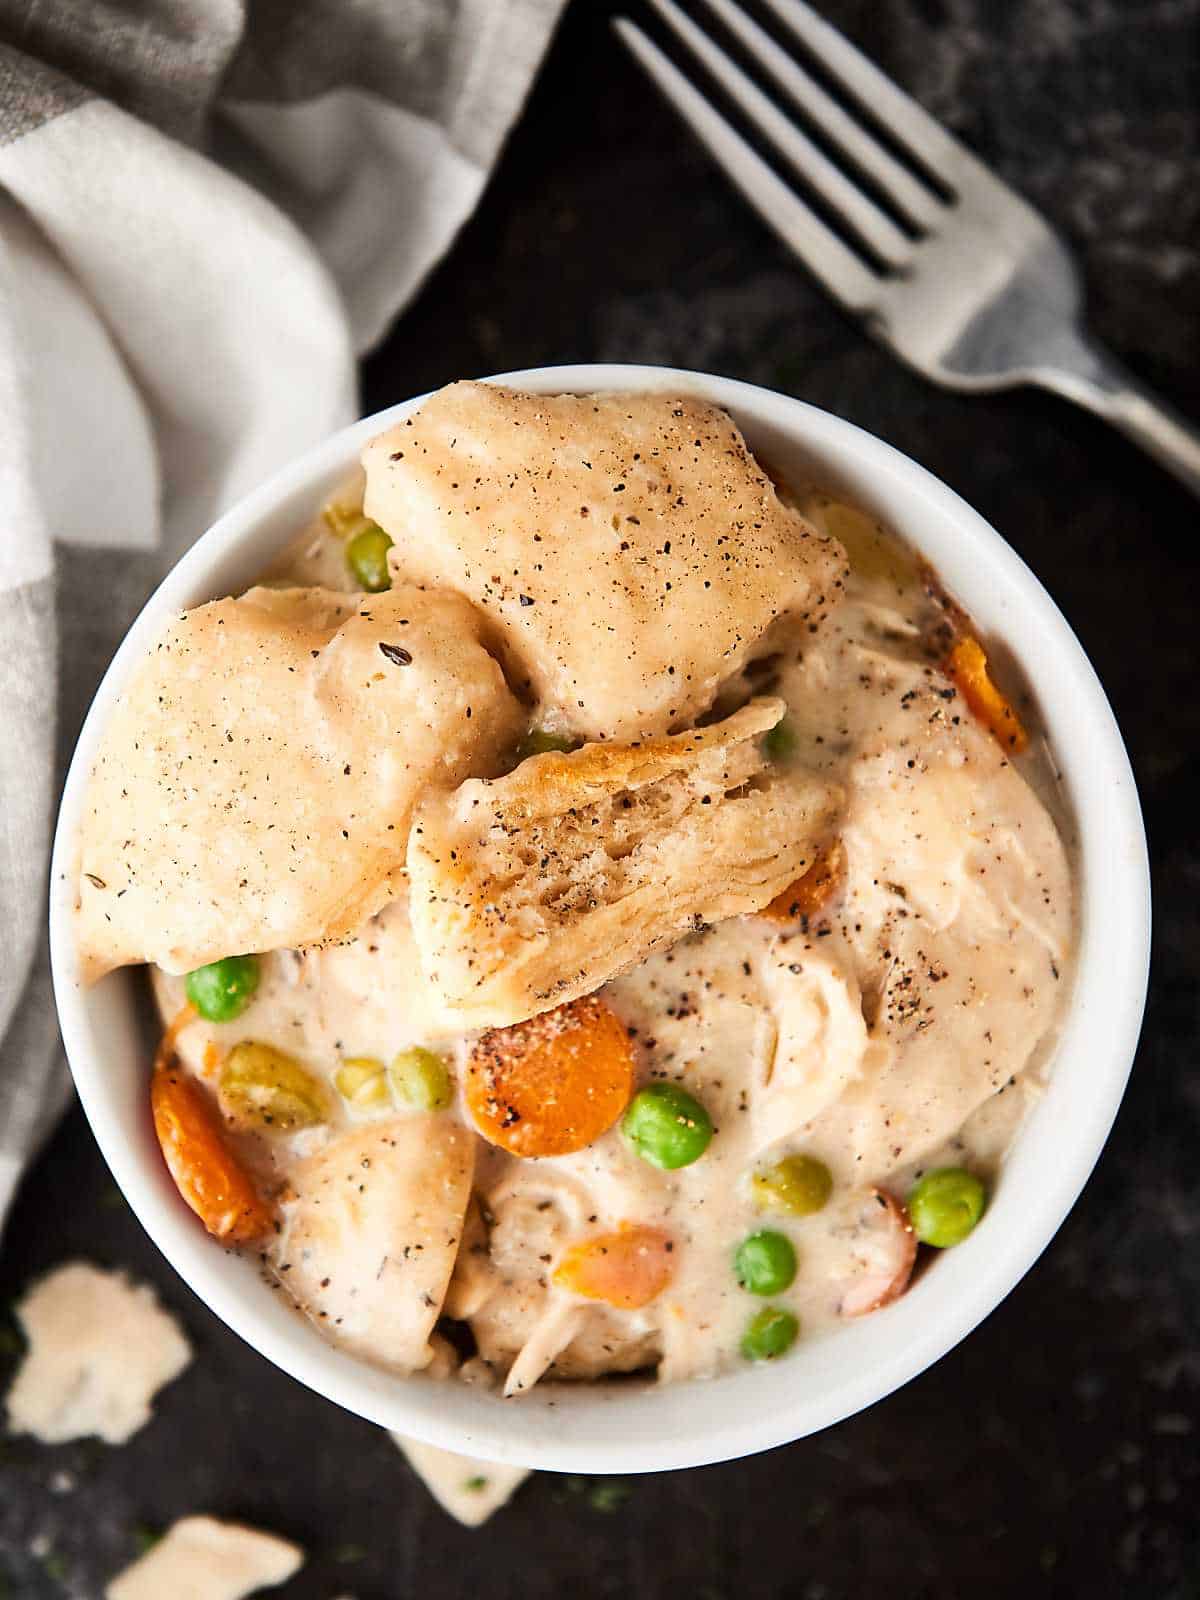 Crockpot Chicken and Dumplings Recipe - with Canned Biscuits